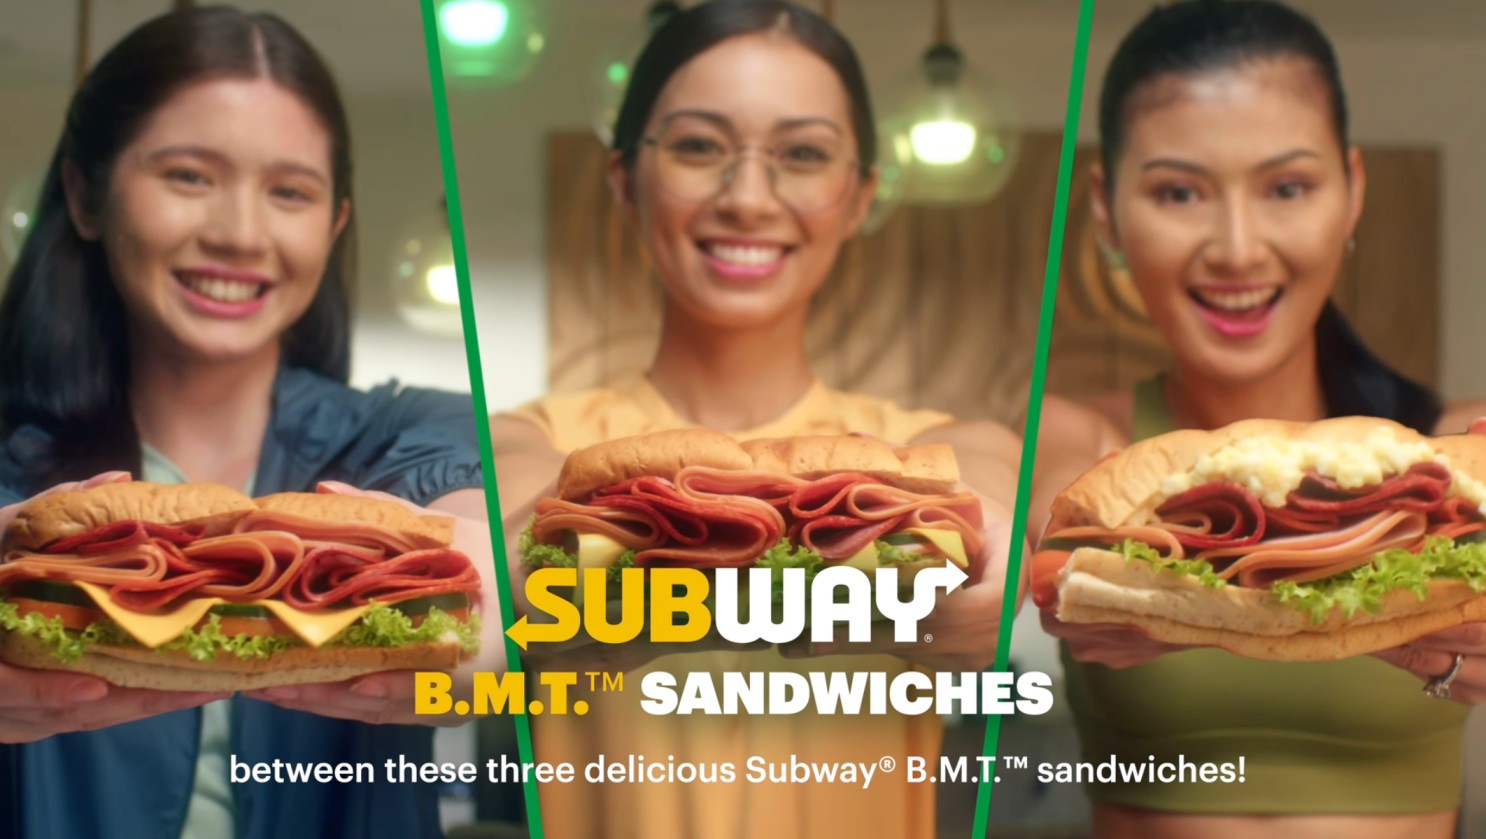 Subway Philippines' new commercial